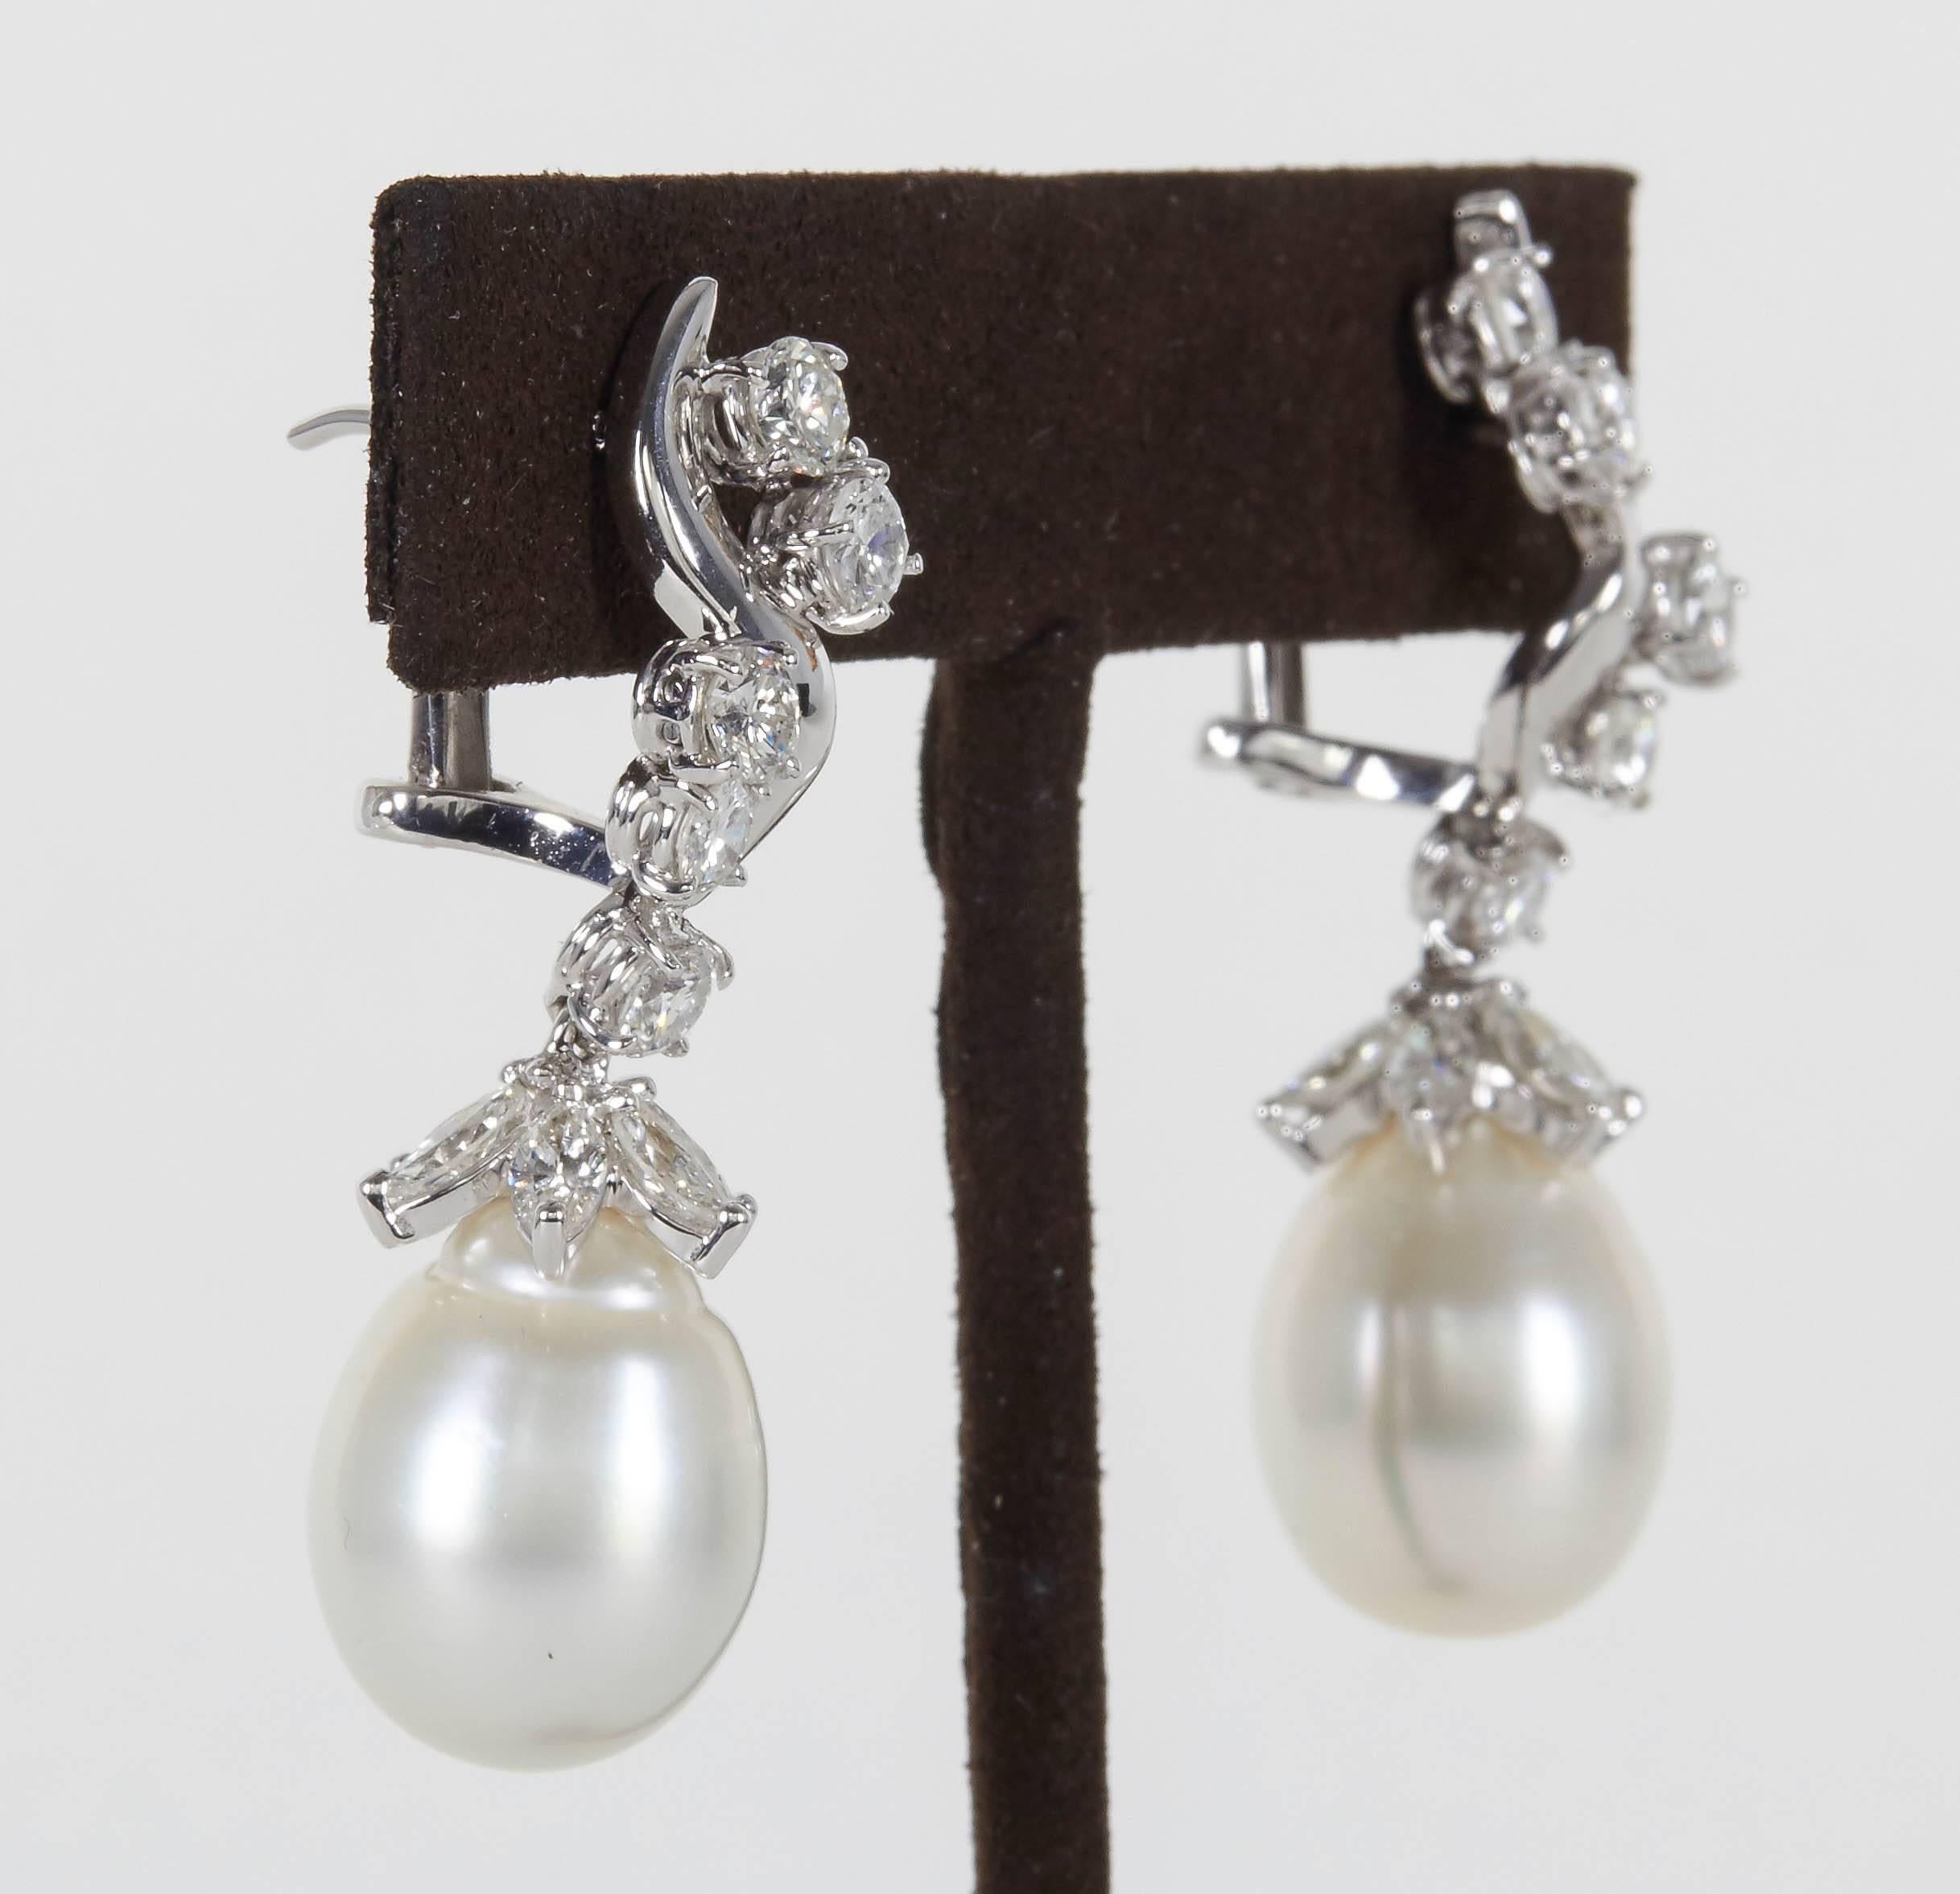 A stunning pair of earrings in a timeless design. 

3.60 carats of round brilliant and marquise cut diamonds.

12 MM pearl.

18k white gold 

Approximately 1.57 inches in length